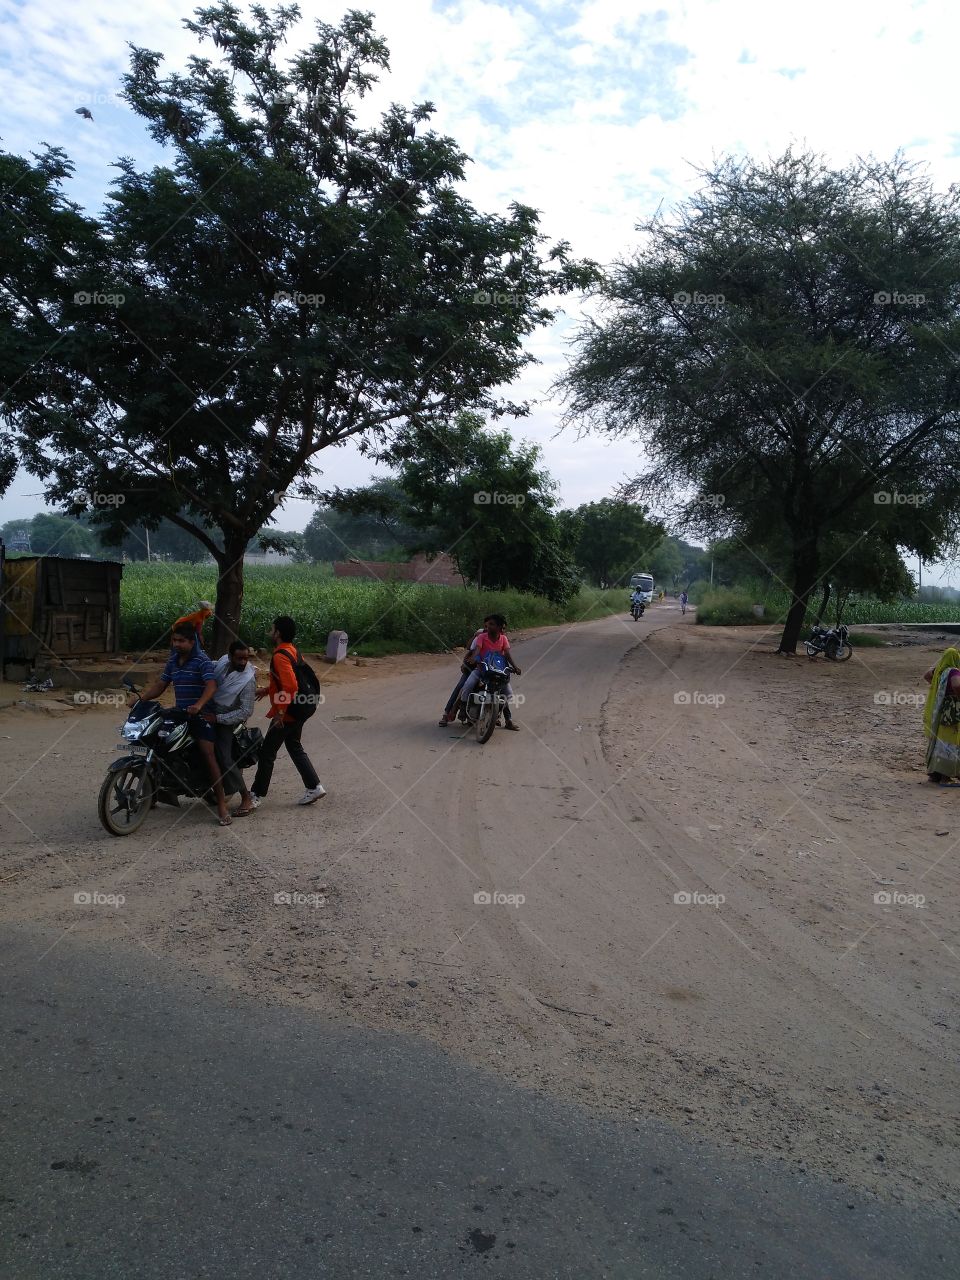 Group of people on motorbikes at countryside road